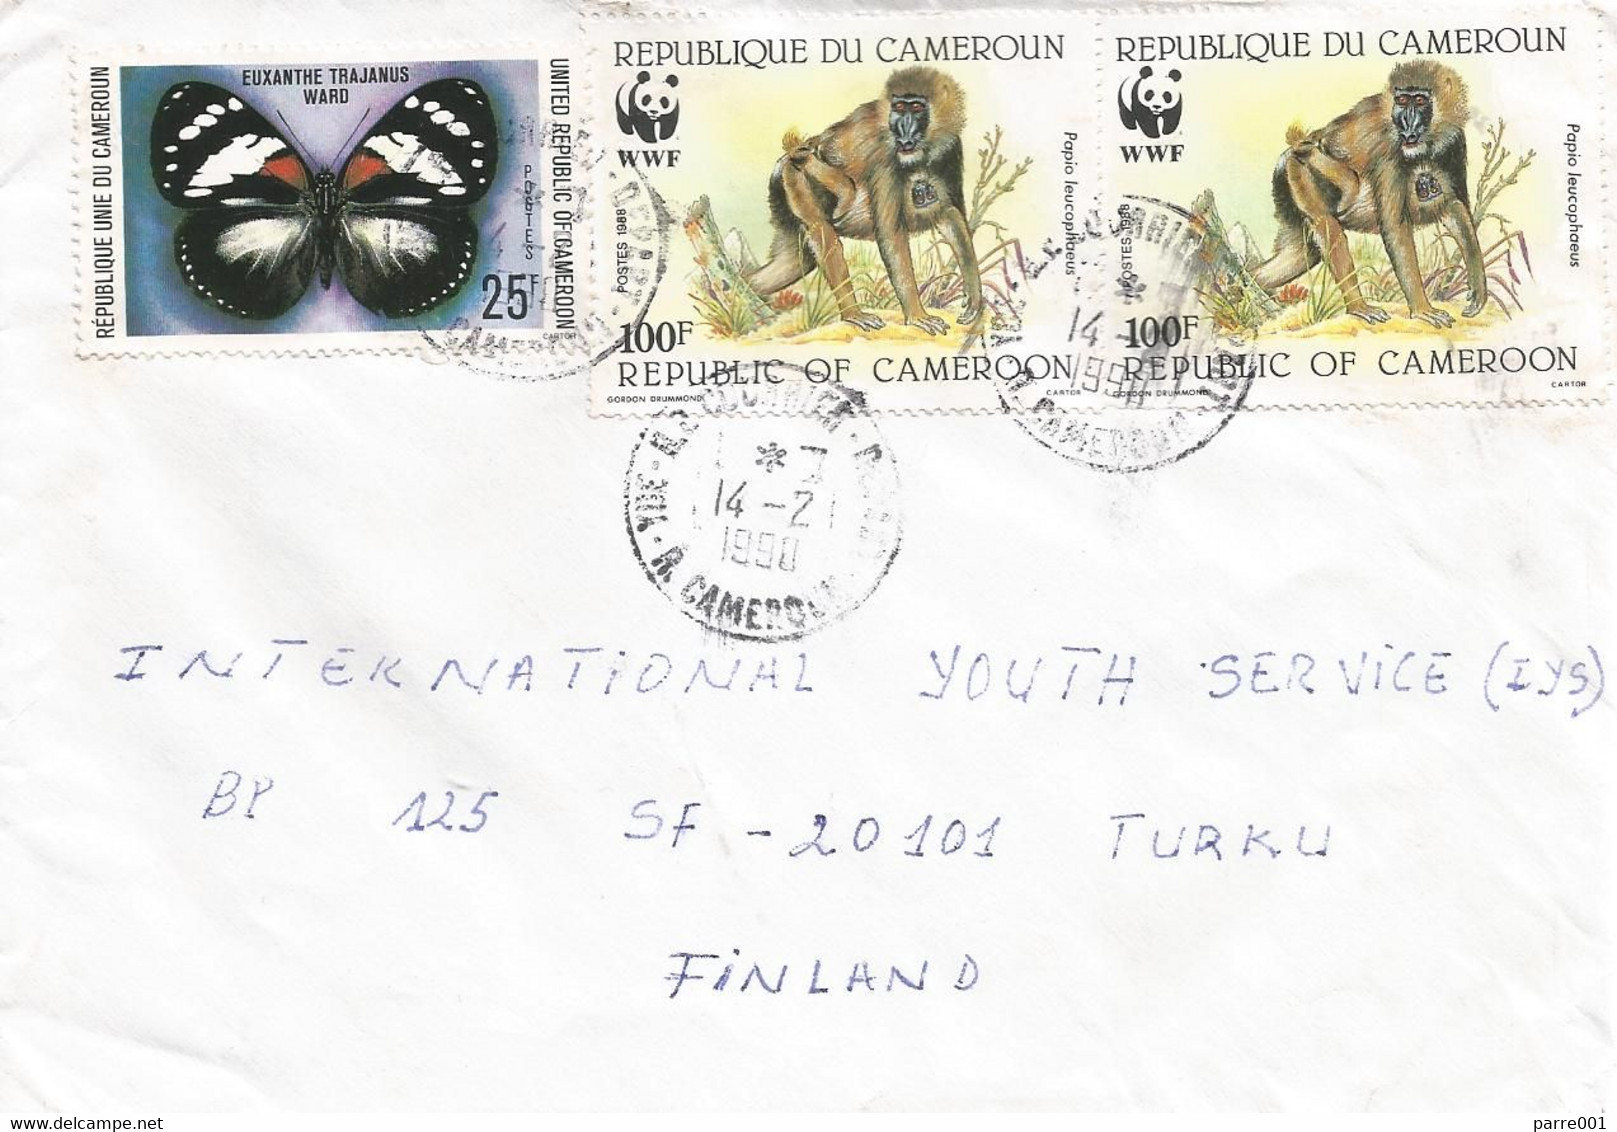 Cameroon Cameroun 1990 Yaounde WWF Drill Ape Monkey Trajan's Forest Queen Euxanthe Trajanus Butterfly Cover - Storia Postale